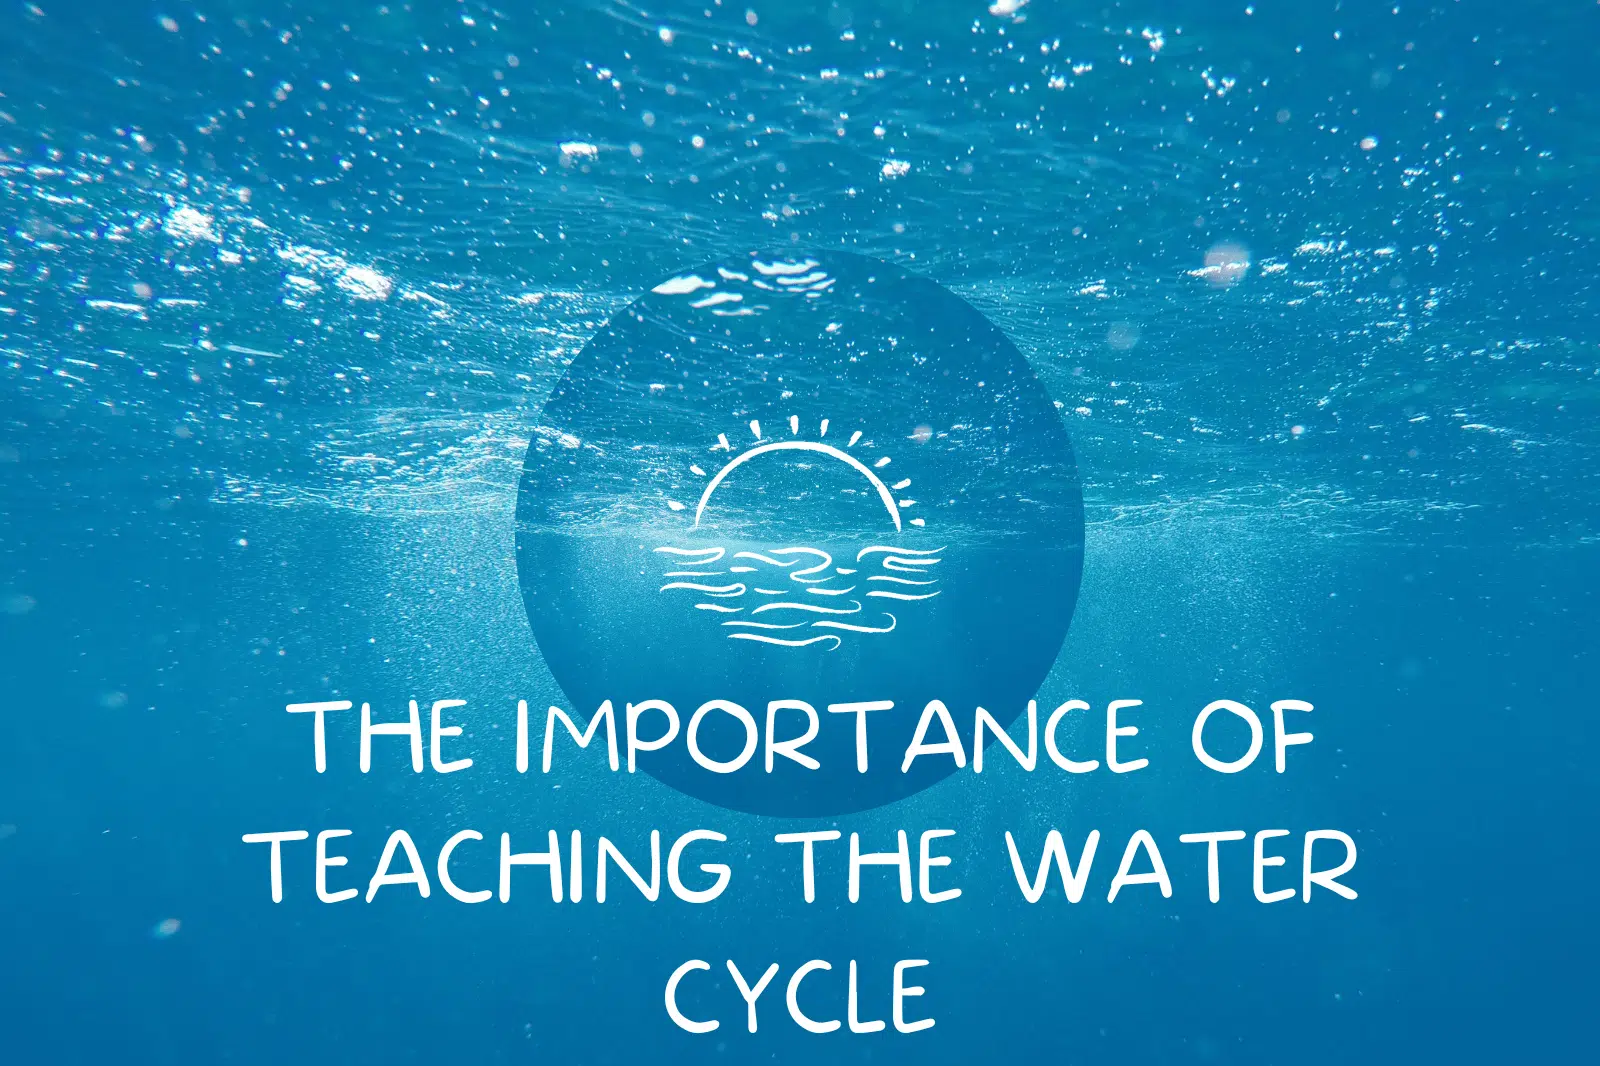 The Importance of Teaching the Water Cycle